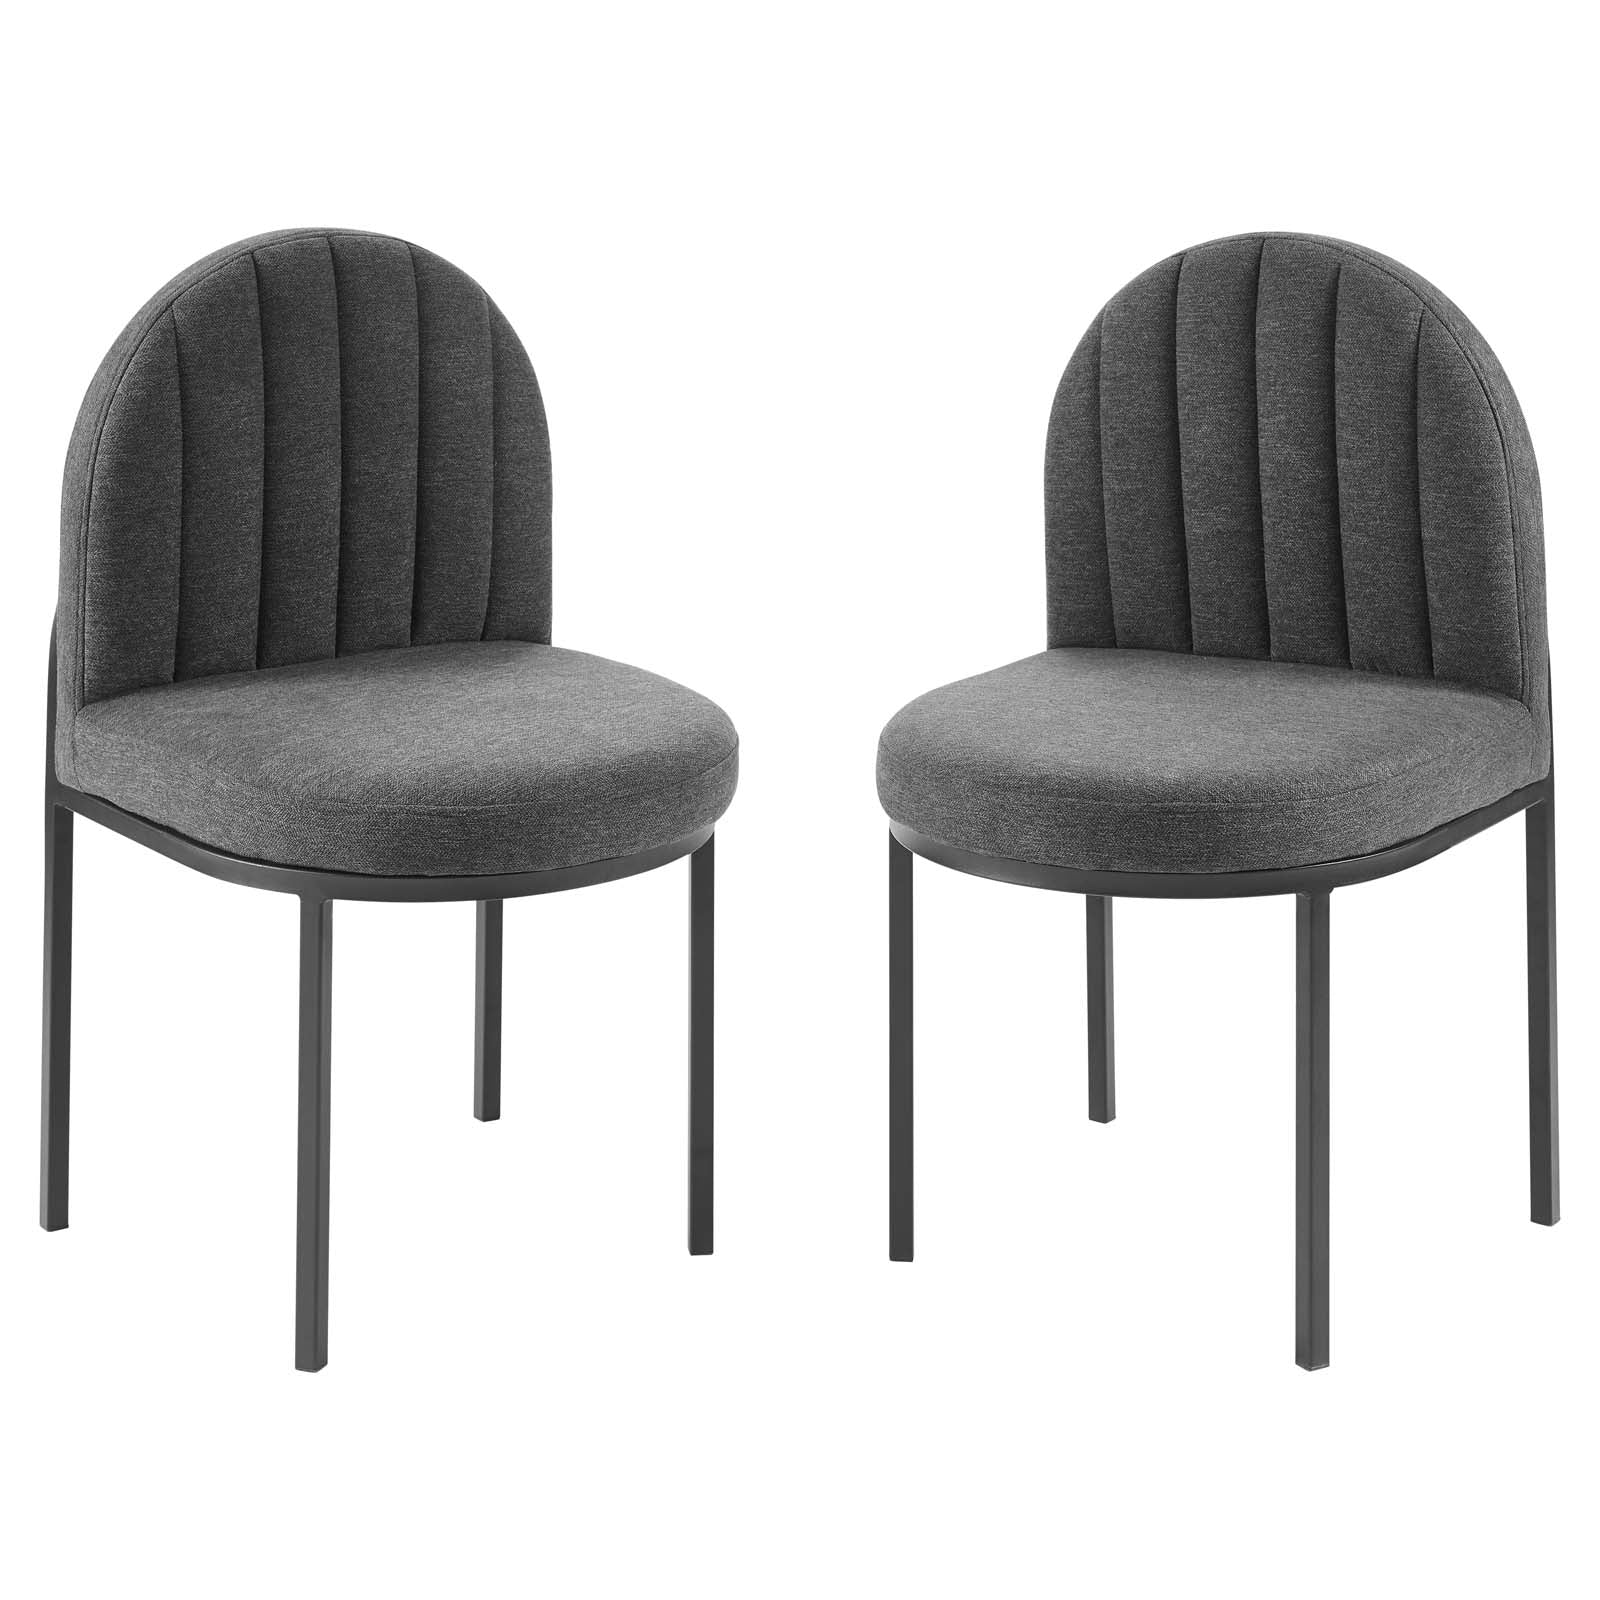 Isla Dining Side Chair Upholstered Fabric Set of 2 - East Shore Modern Home Furnishings